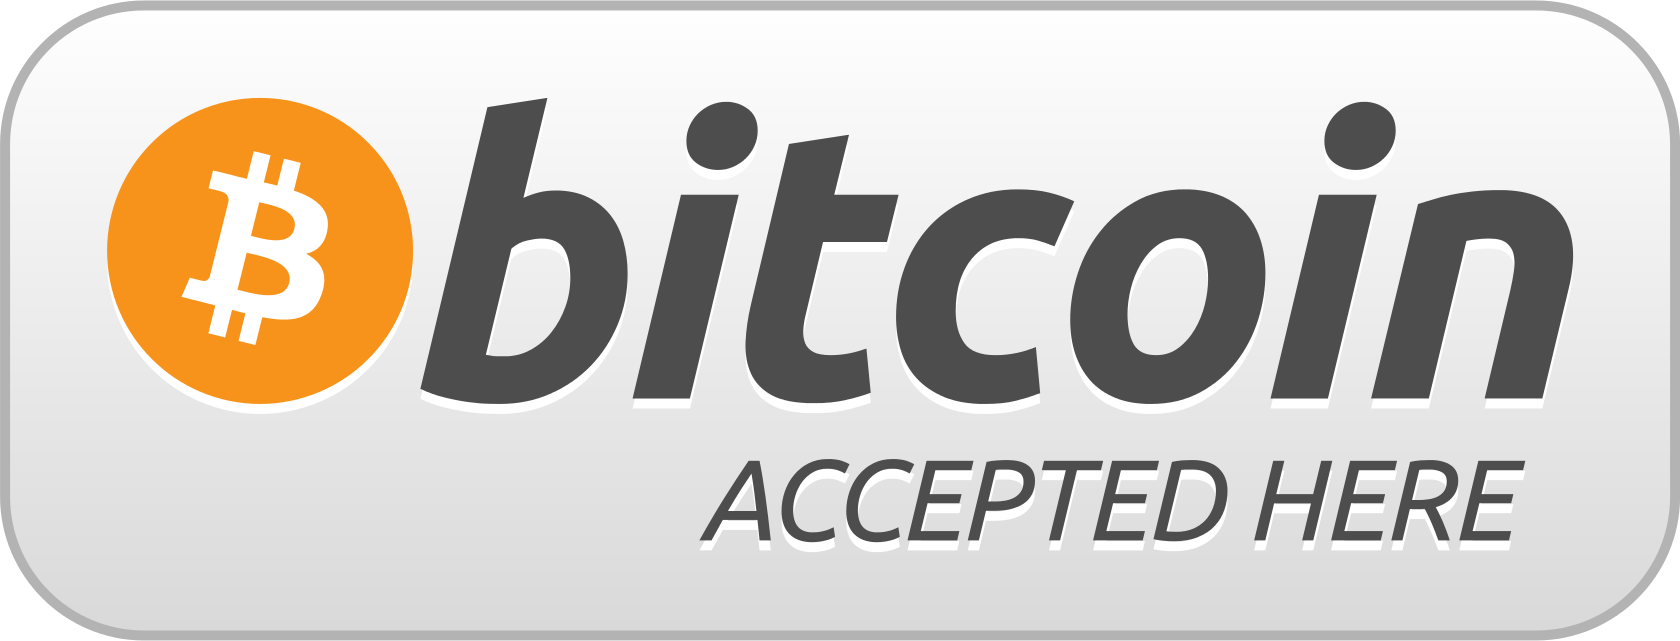 Bitcoin accepted here printable.png